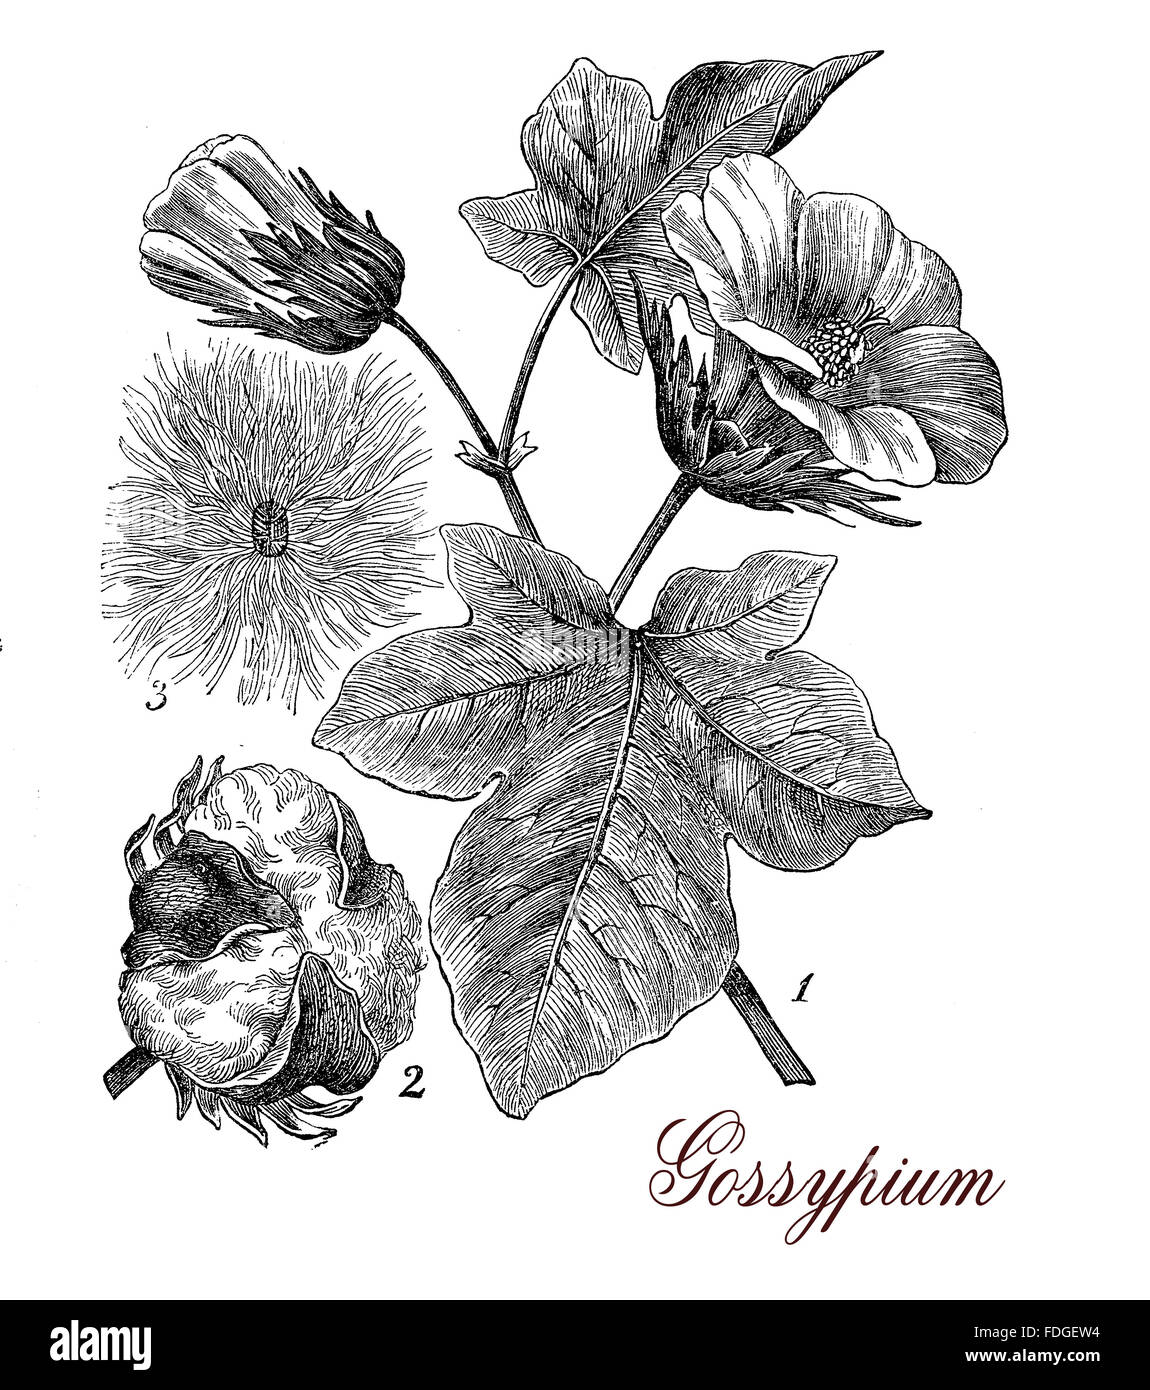 Vintage print describing cotton plant (gossypium) botanical morphology: leaves,flowers and seeds in a capsule surrounded by staples used for weaving. Stock Photo